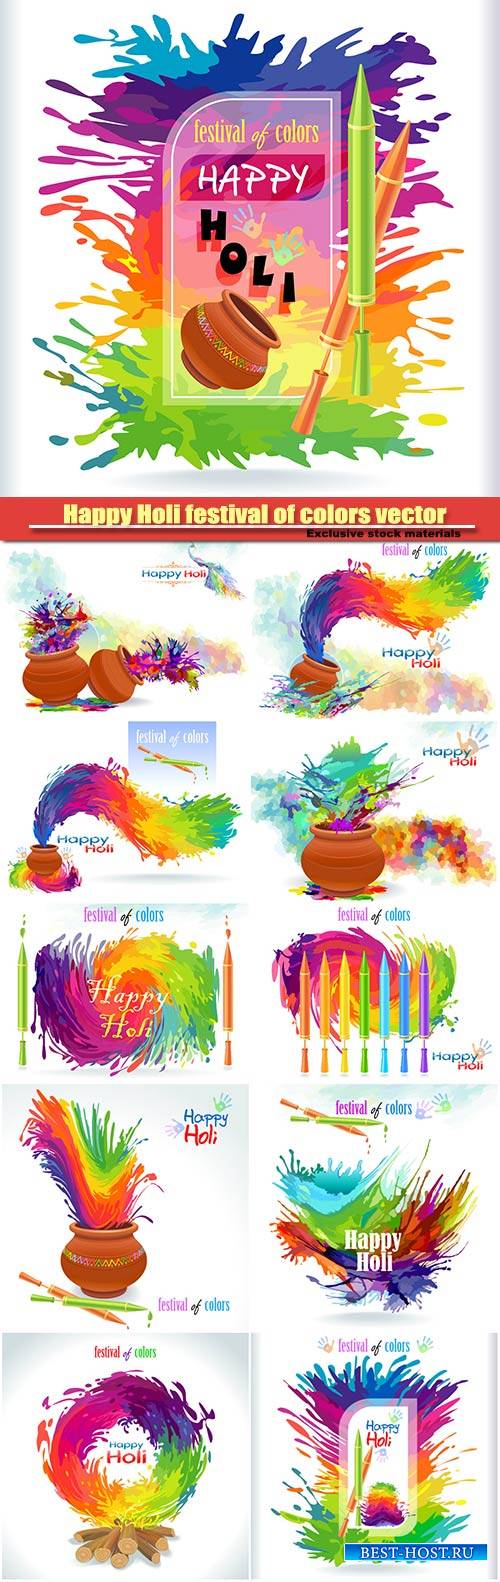 Happy Holi festival of colors vector background